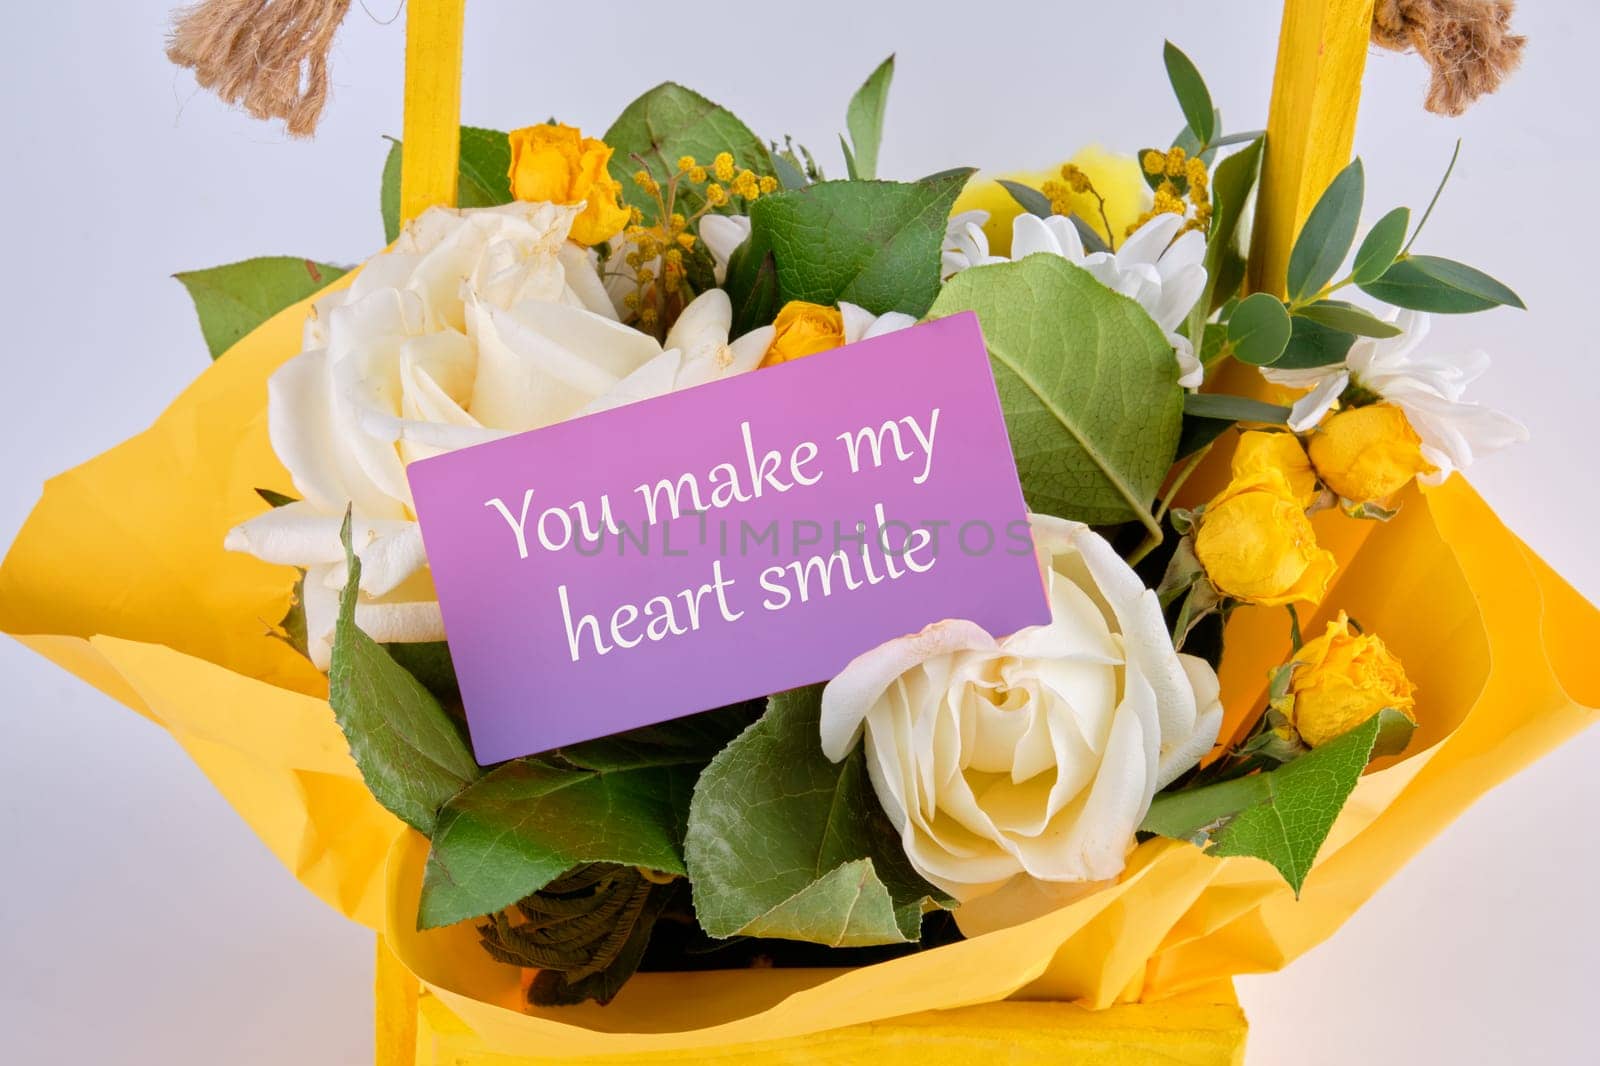 You Make My Heart Smile text on a business card in a basket with blooming flowers